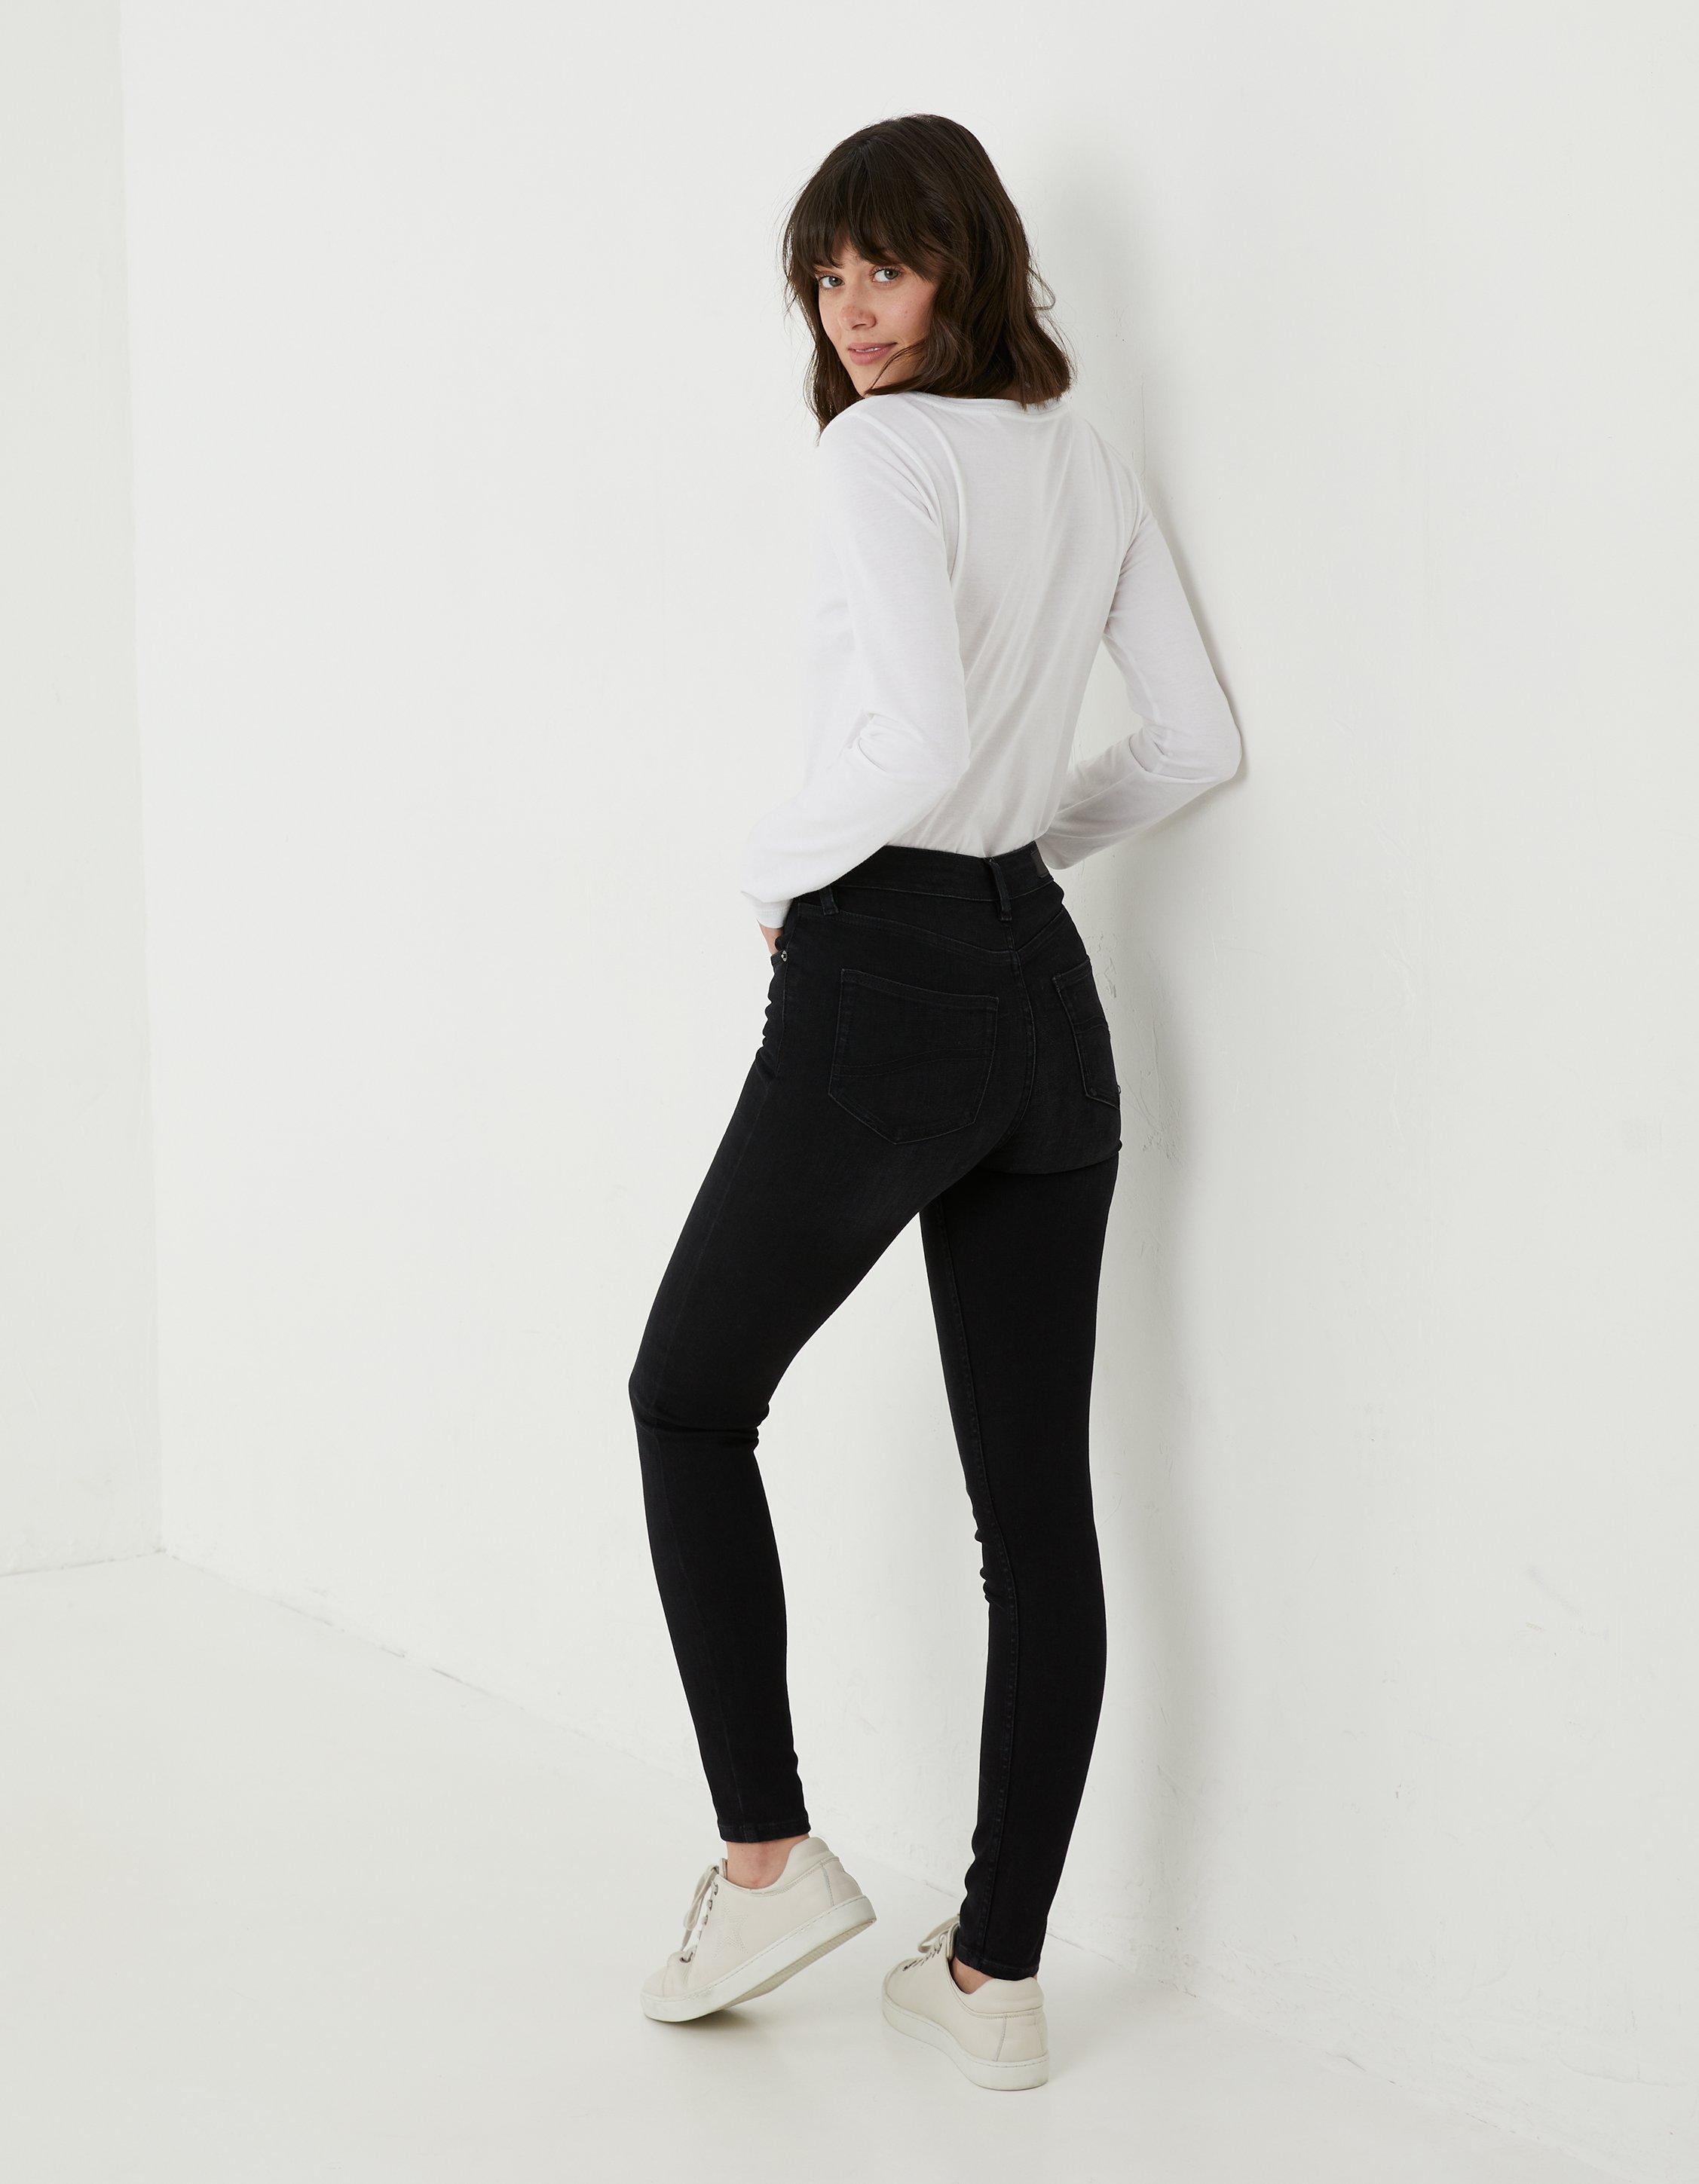 SALE: Super High Waisted Jeans In Black, Noisy May